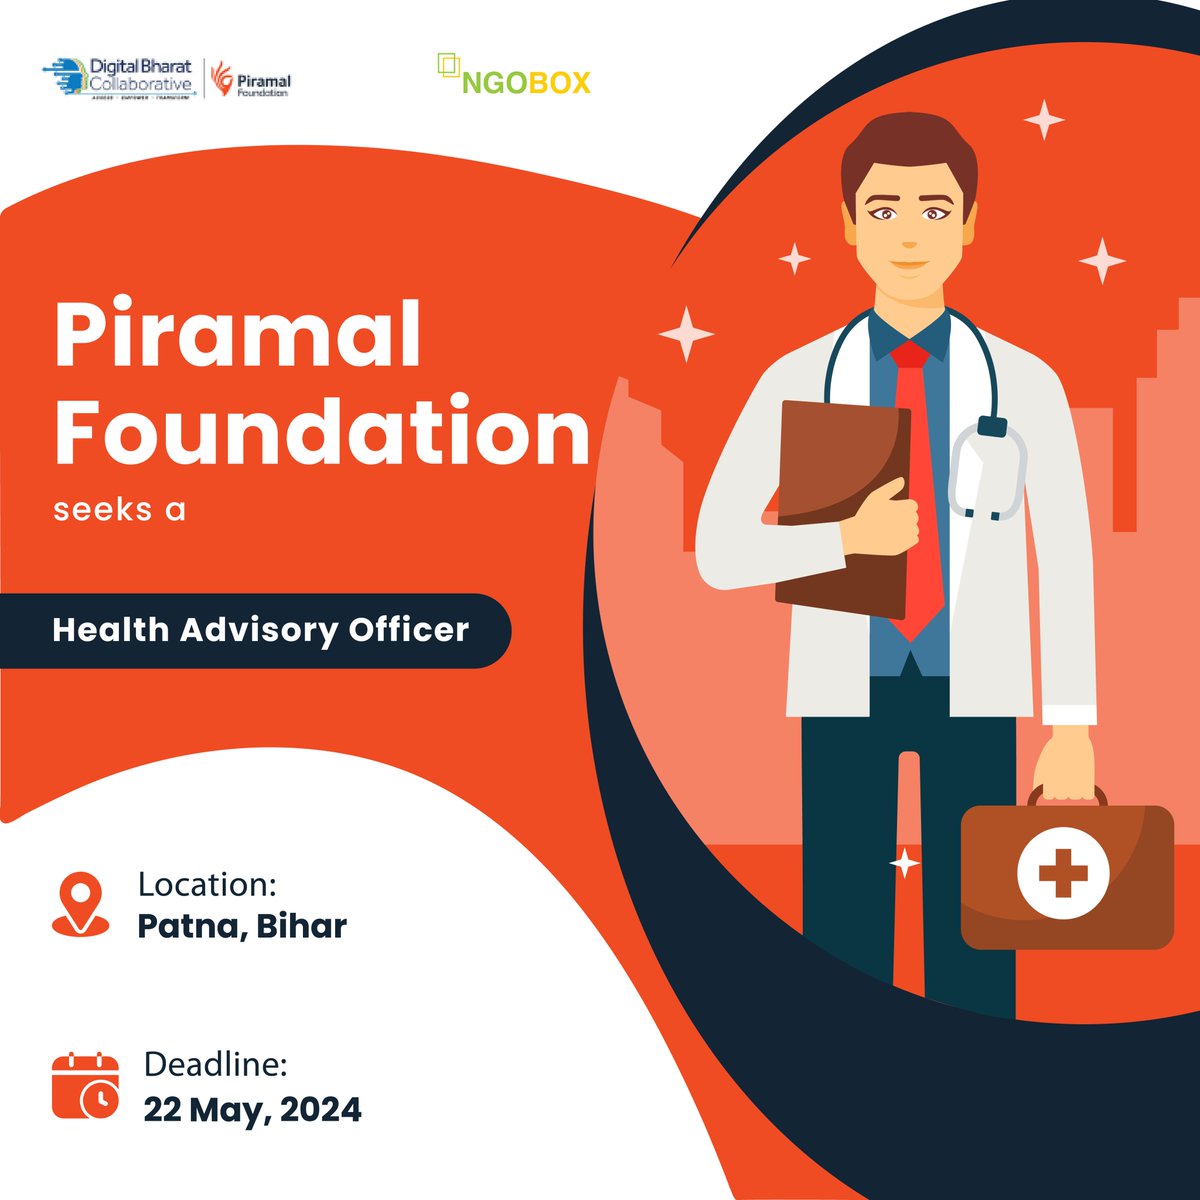 Piramal Foundation is looking for a Health Advisory Officer. Required qualifications include B Pharma /D. Pharma/ B.sc Nursing/GNM with 0-1 years of experience. The position is based in Patna, Bihar. Apply here: [ngobox.org/job-detail_Hea…] #JobOpening #Healthcare